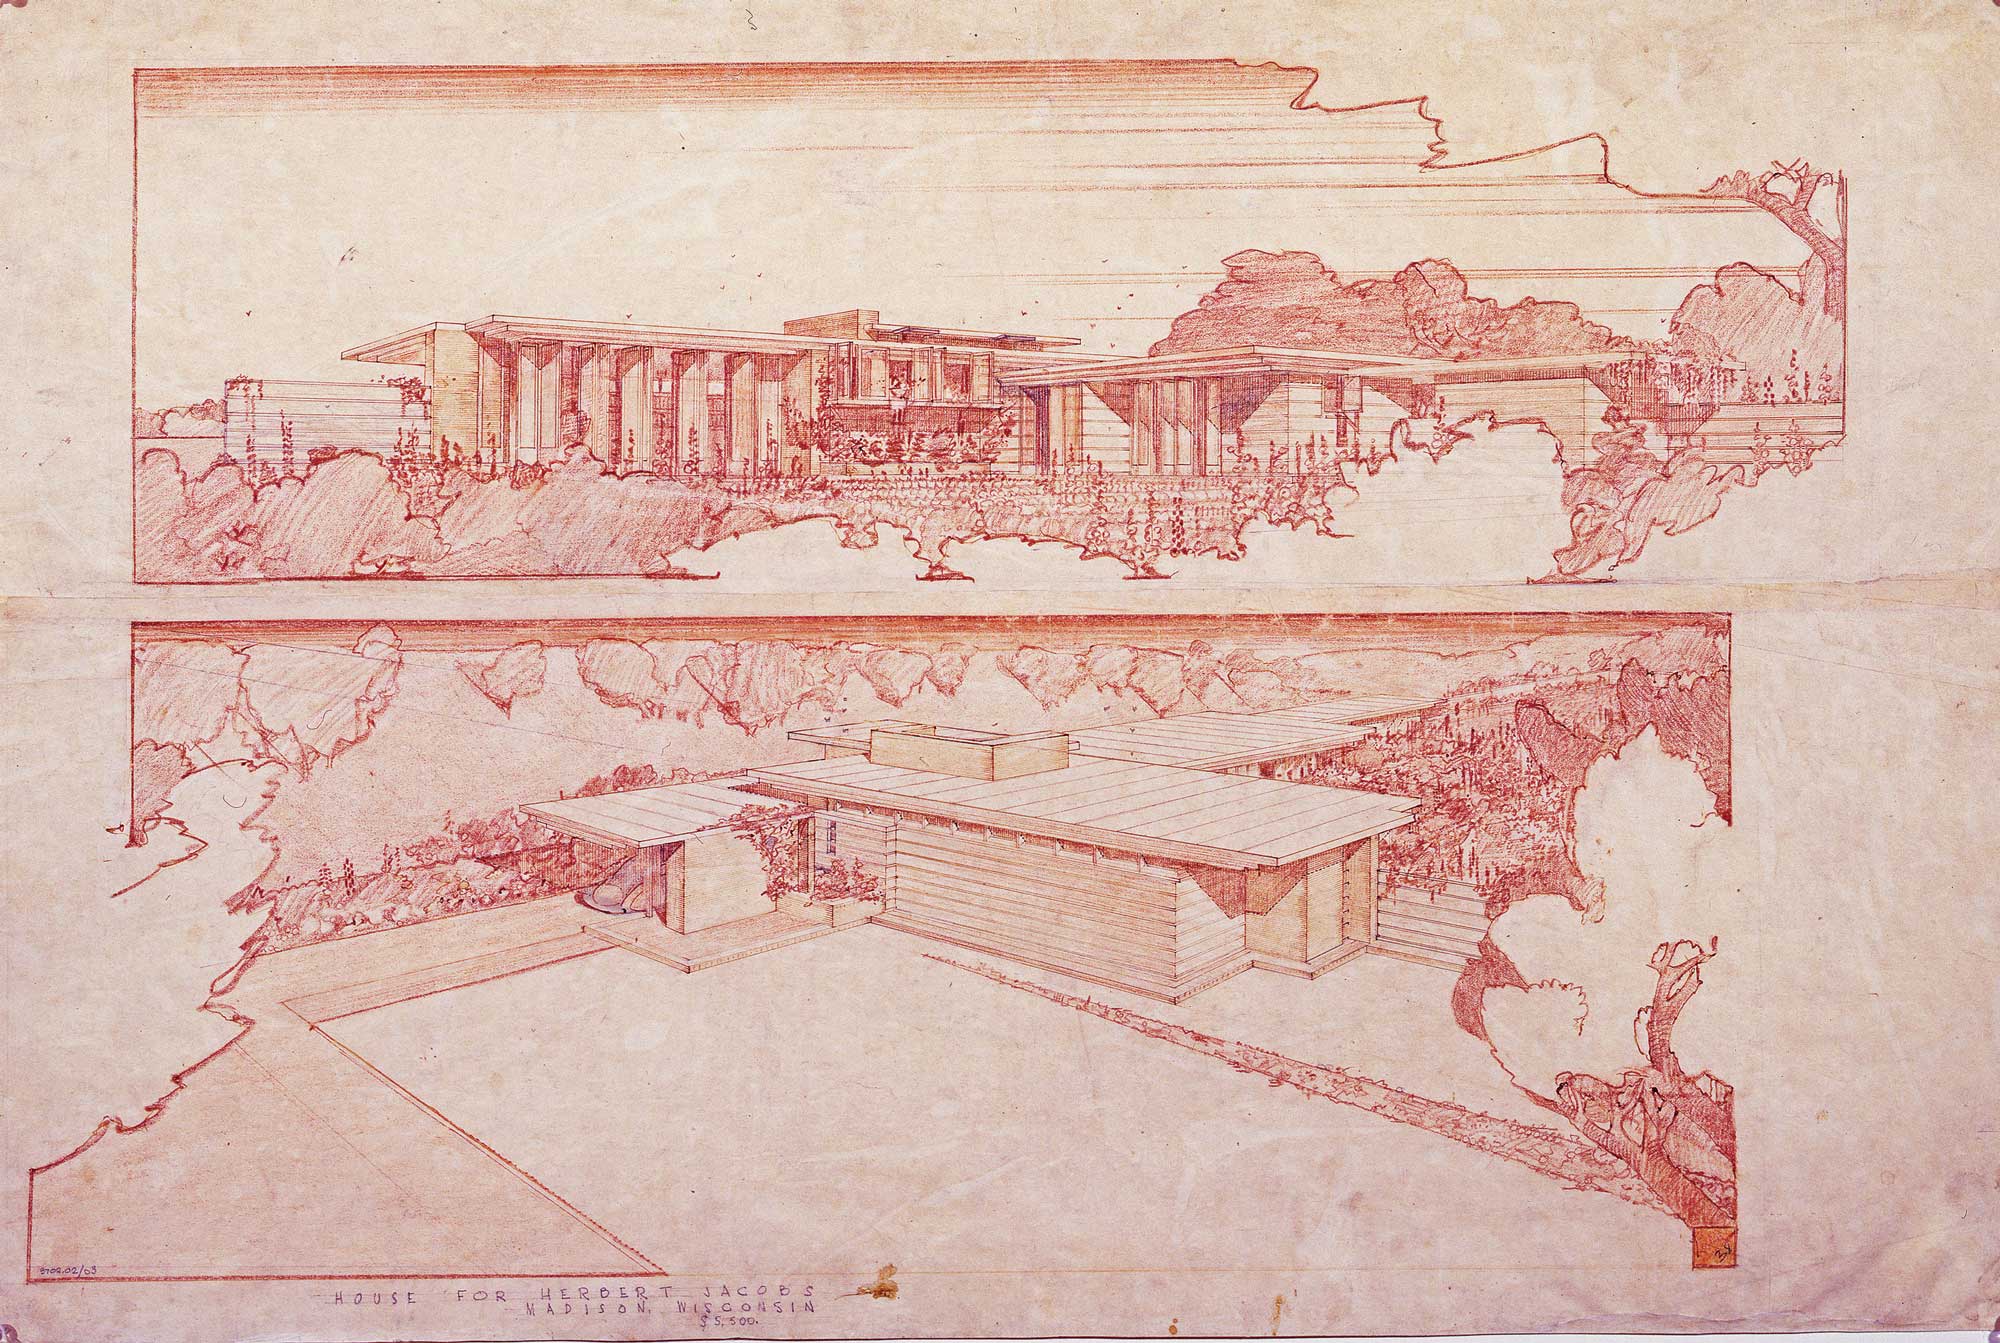 Pencil sketch of Jacobs 1, courtesy of the Frank Lloyd Wright Foundation Archives. All rights reserved.